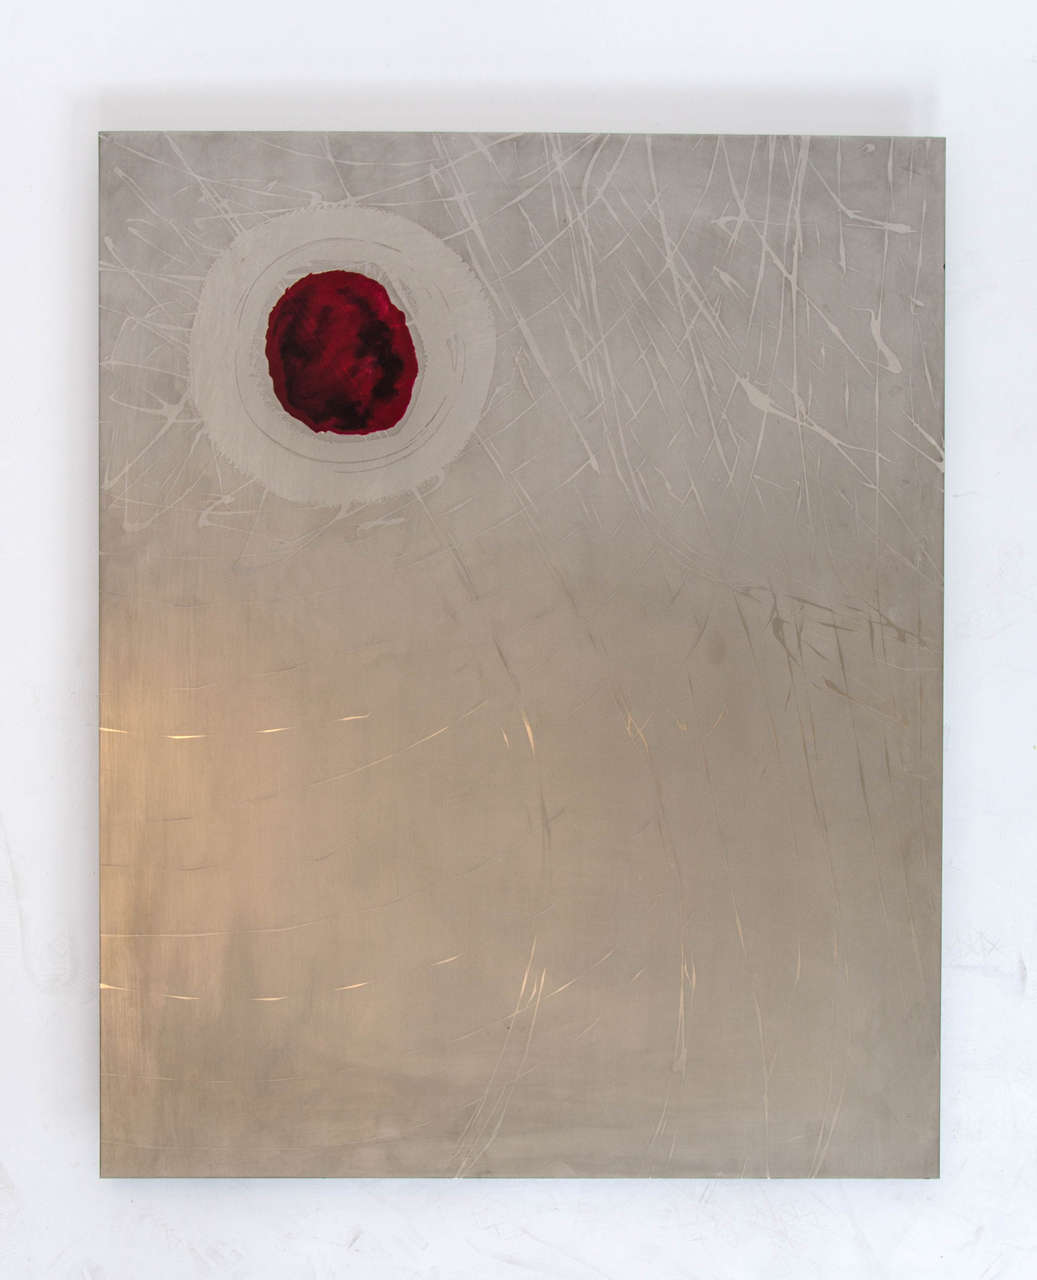 Stainless steel art work with etched abstract relief and enamel blue and red paint by unknown Dutch artist .